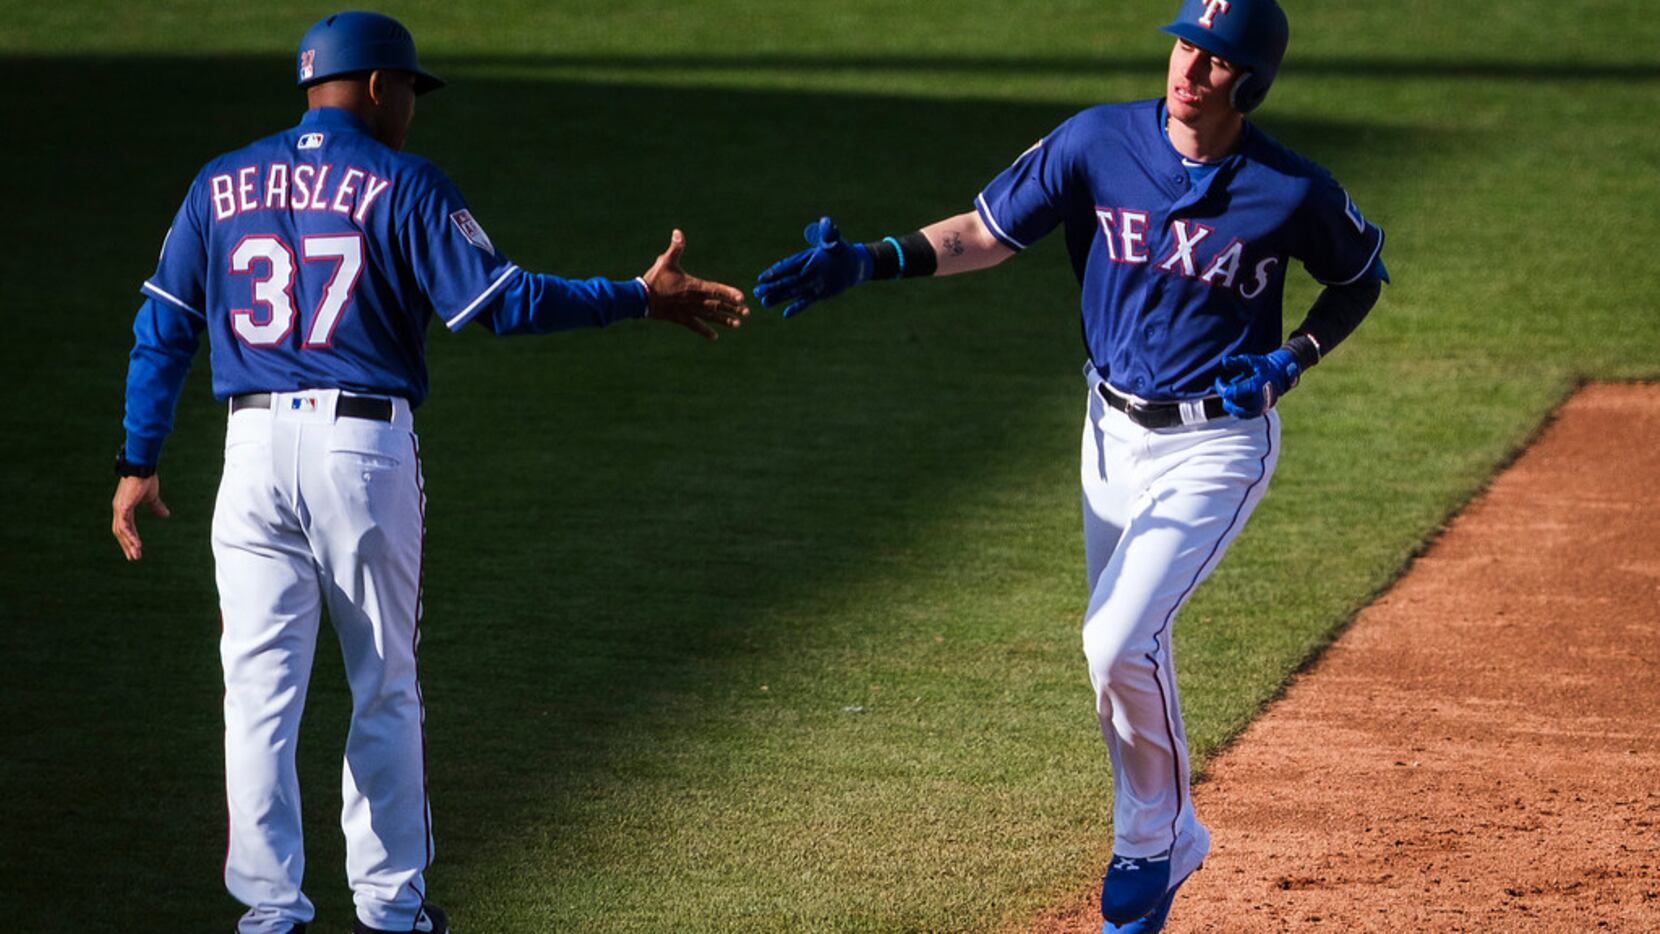 Texas Rangers outfielder Carlos Tocci gets a hand from third base coach Tony Beasley (37) as...